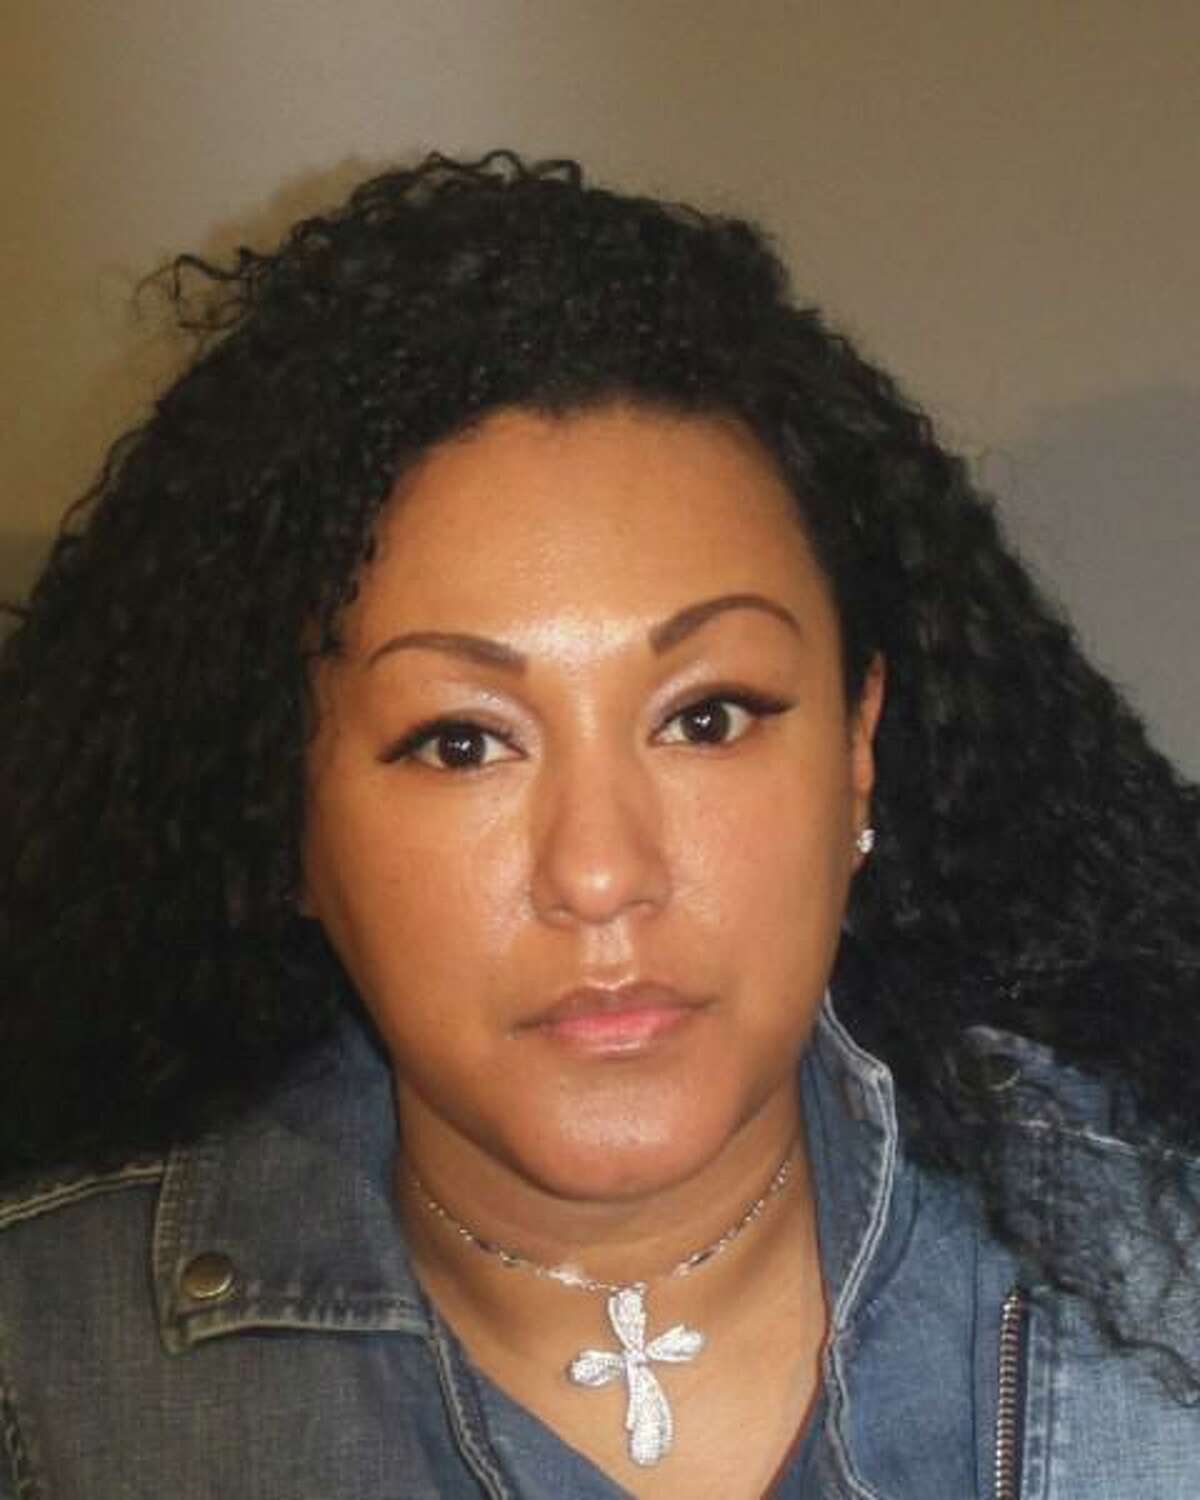 Shalina Nichole Tallman, 36, of Danbury, is facing a second-degree hindering prosecution charge after police say she knowingly rendered criminal assistance to at least one of the five individuals arrested last month in connection with the March 18 fatal stabbing of Willy Placencia.